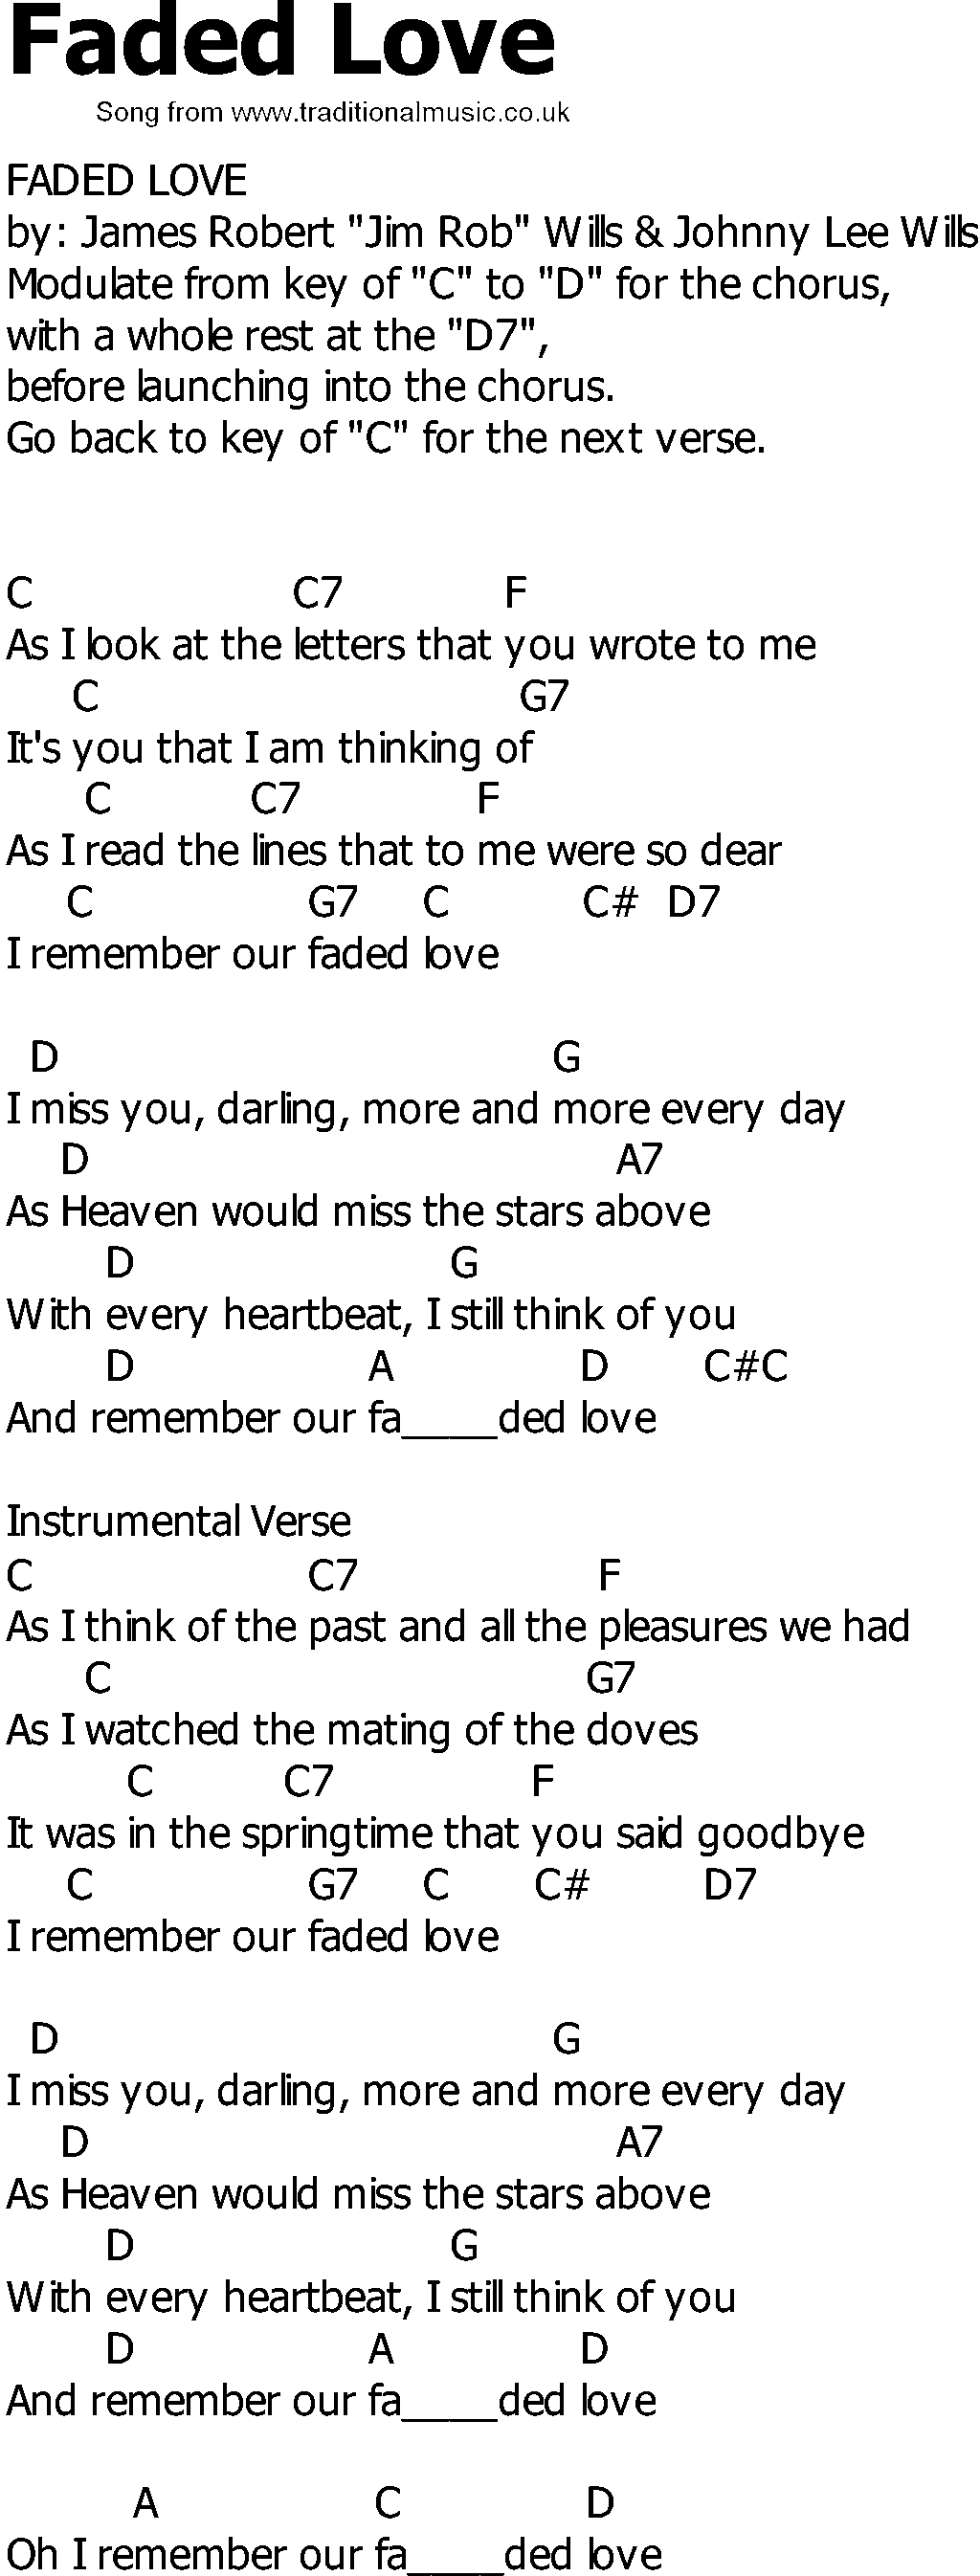 Old Country song lyrics with chords - Faded Love